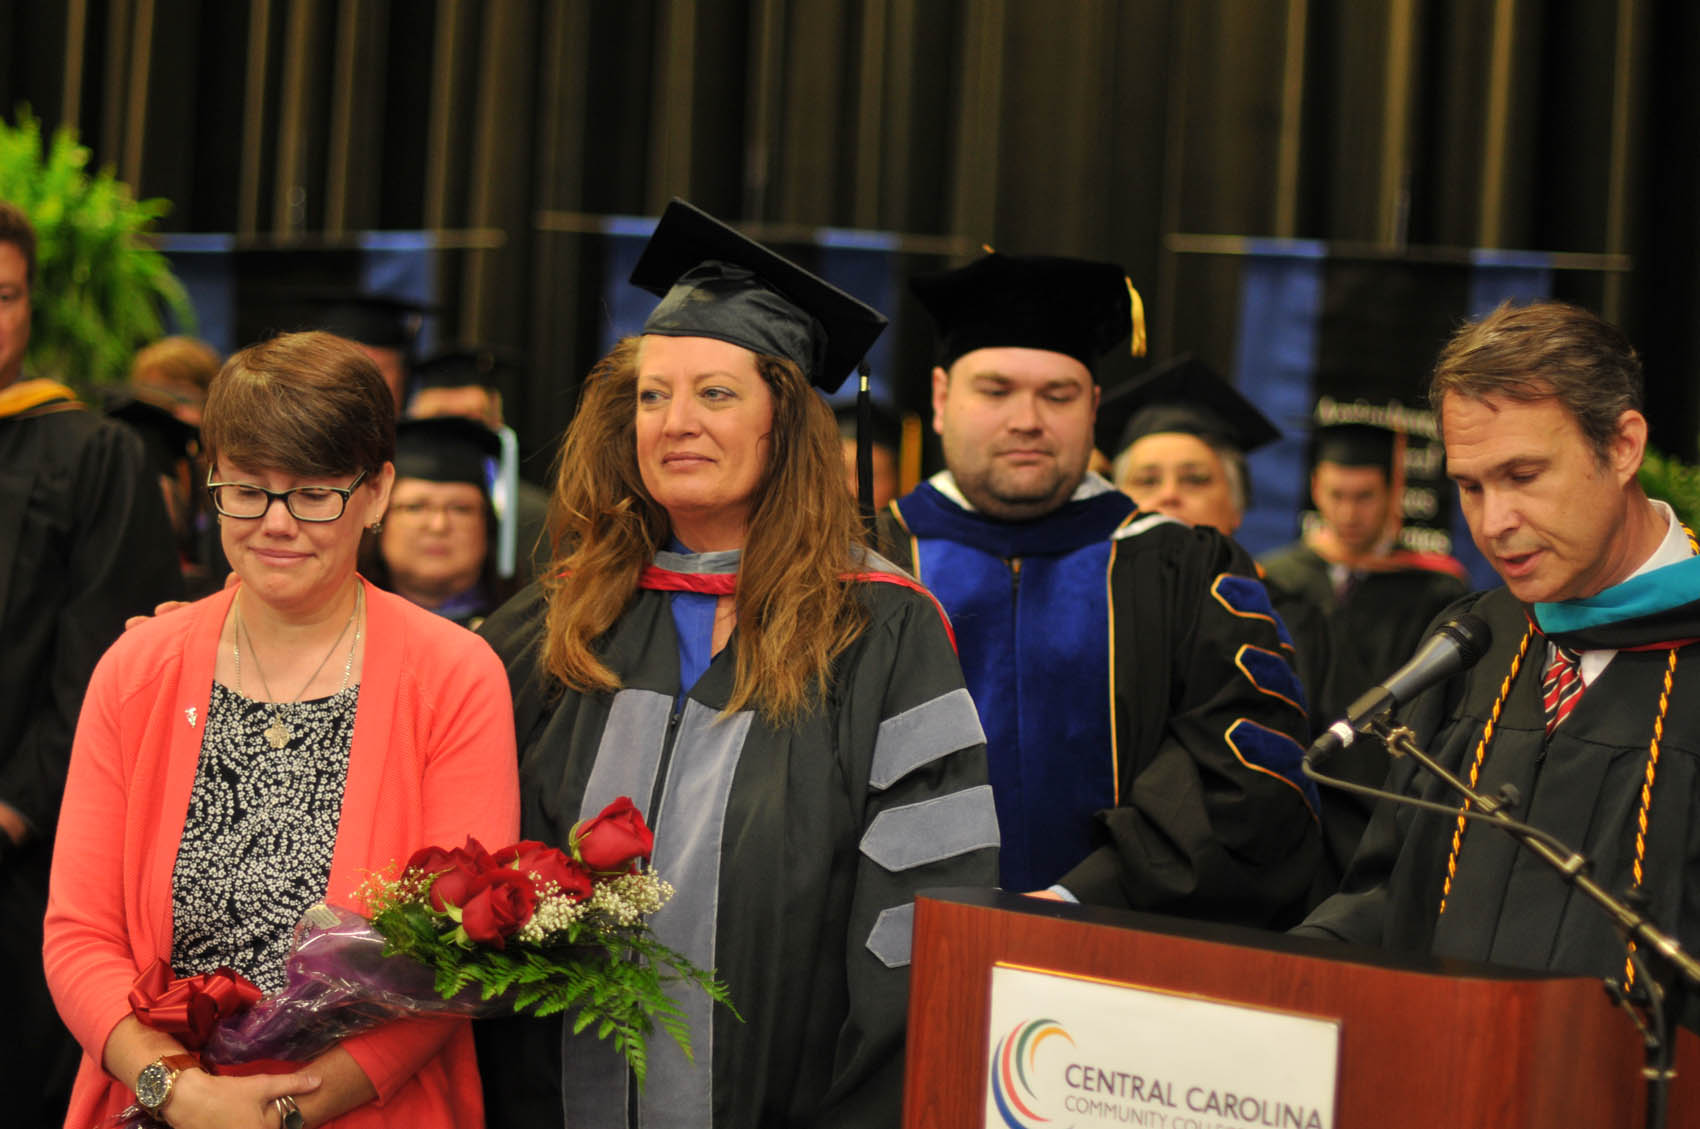 Click to enlarge,  Ken Hoyle Jr. (right), Vice President of Student Services, memorialized former Veterinary Medical Technology staff member Jonathan Loftis by recognizing his wife, Kelley (left), at the Central Carolina Community College graduation on May 12. "Kelley, we all miss Jonathan and the College has fully shared in your loss," said Hoyle. "Please know that as each new student is admitted to the Vet Med program, as each graduate receives their diploma, and as each animal is then touched and healed by these graduates, Jonathan's legacy will go on and on." Jonathan Loftis served as Animal Facilities Manager and Instructor in the CCCC Veterinary Medical Technology program. Pictured next to Kelley Loftis is CCCC VMT Chair Kim Browning. 